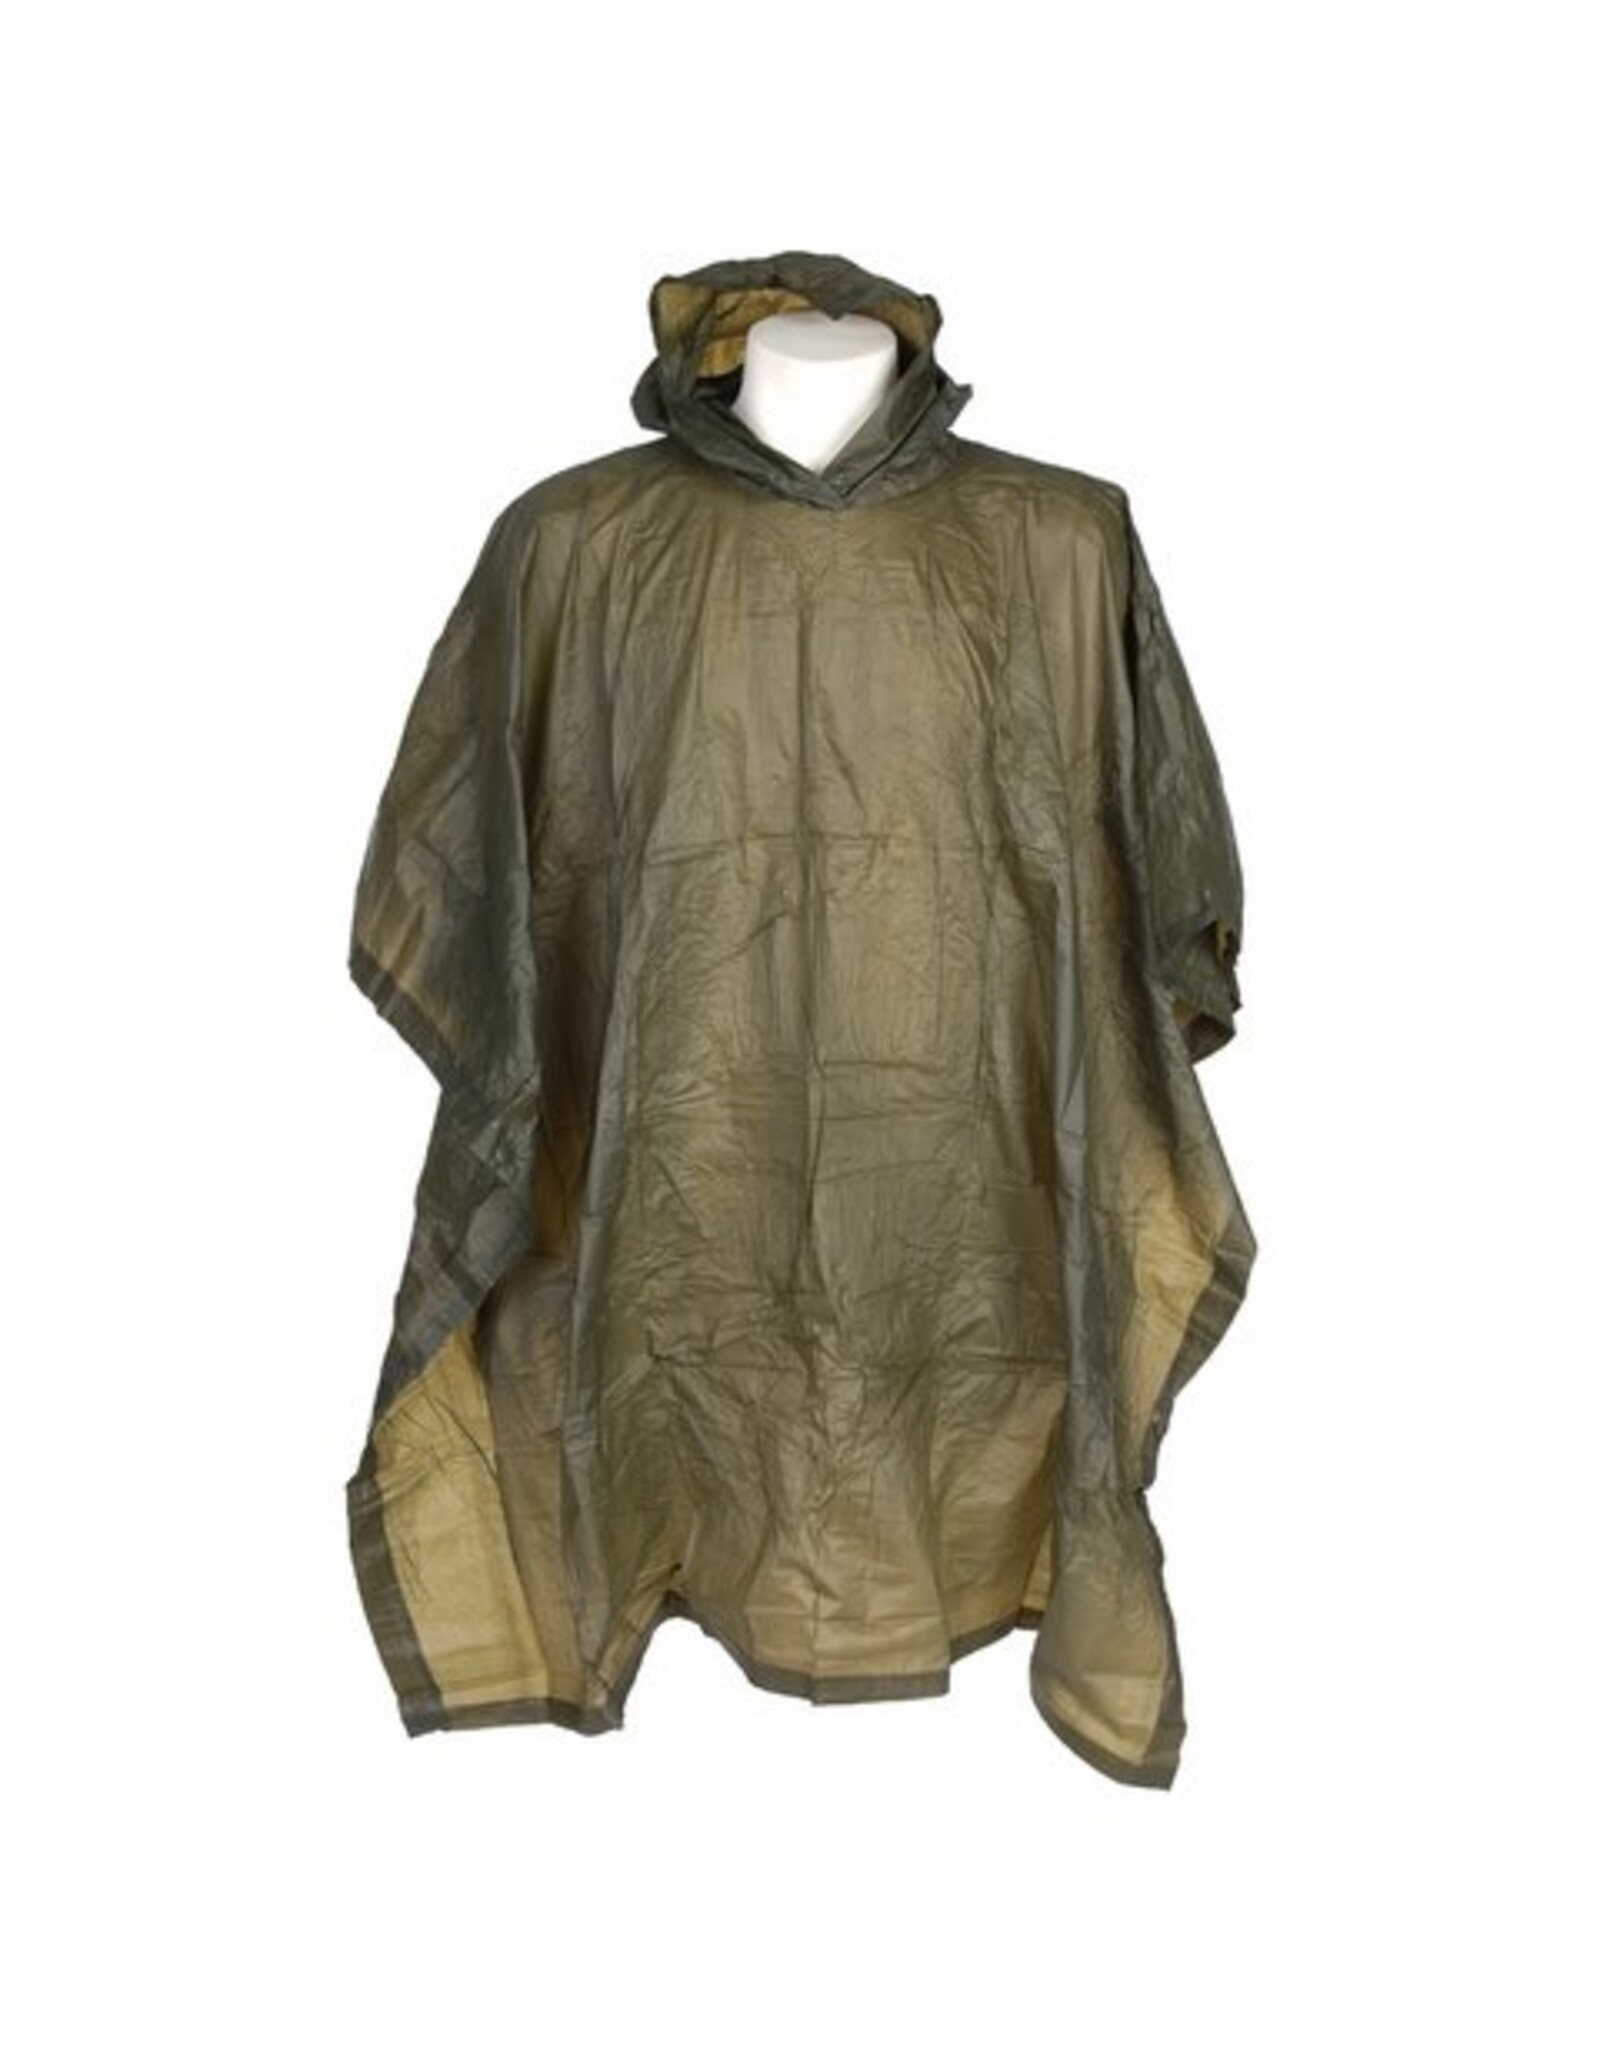 Poncho light weight